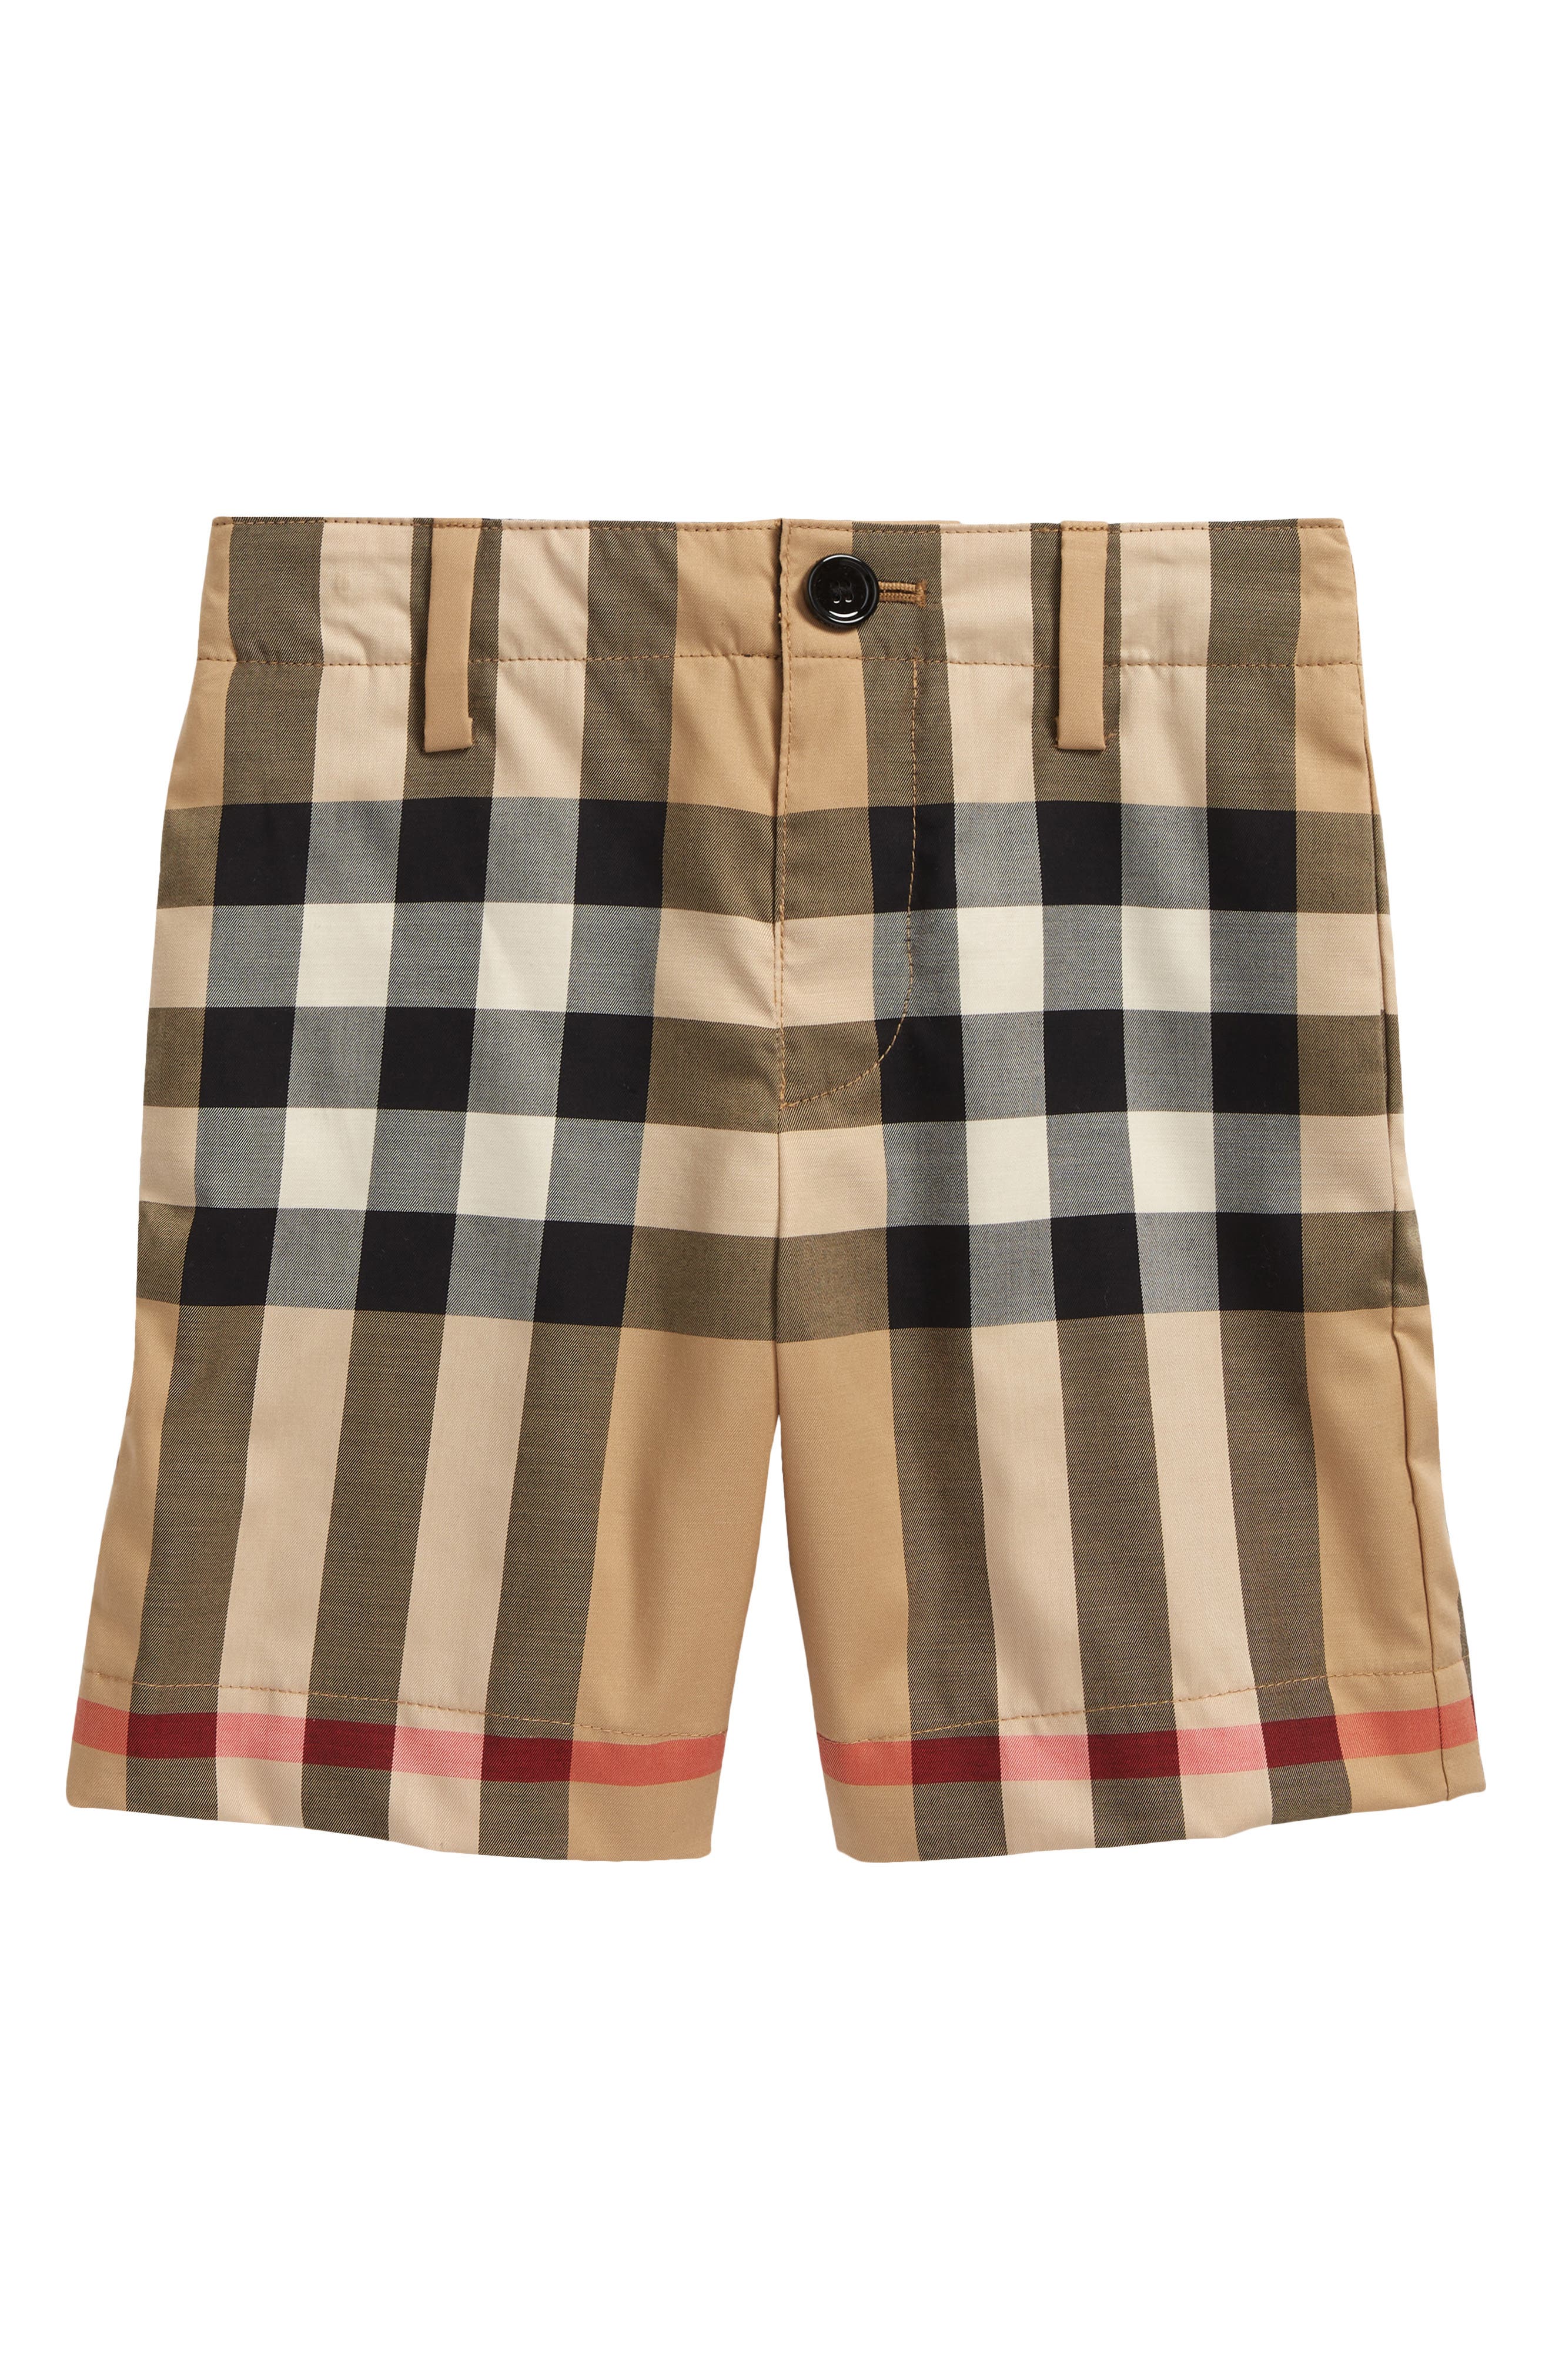 Burberry Kids' Royson Check Stretch Cotton Shorts in Archive Beige Ip Chk at Nordstrom, Size 8Y Us